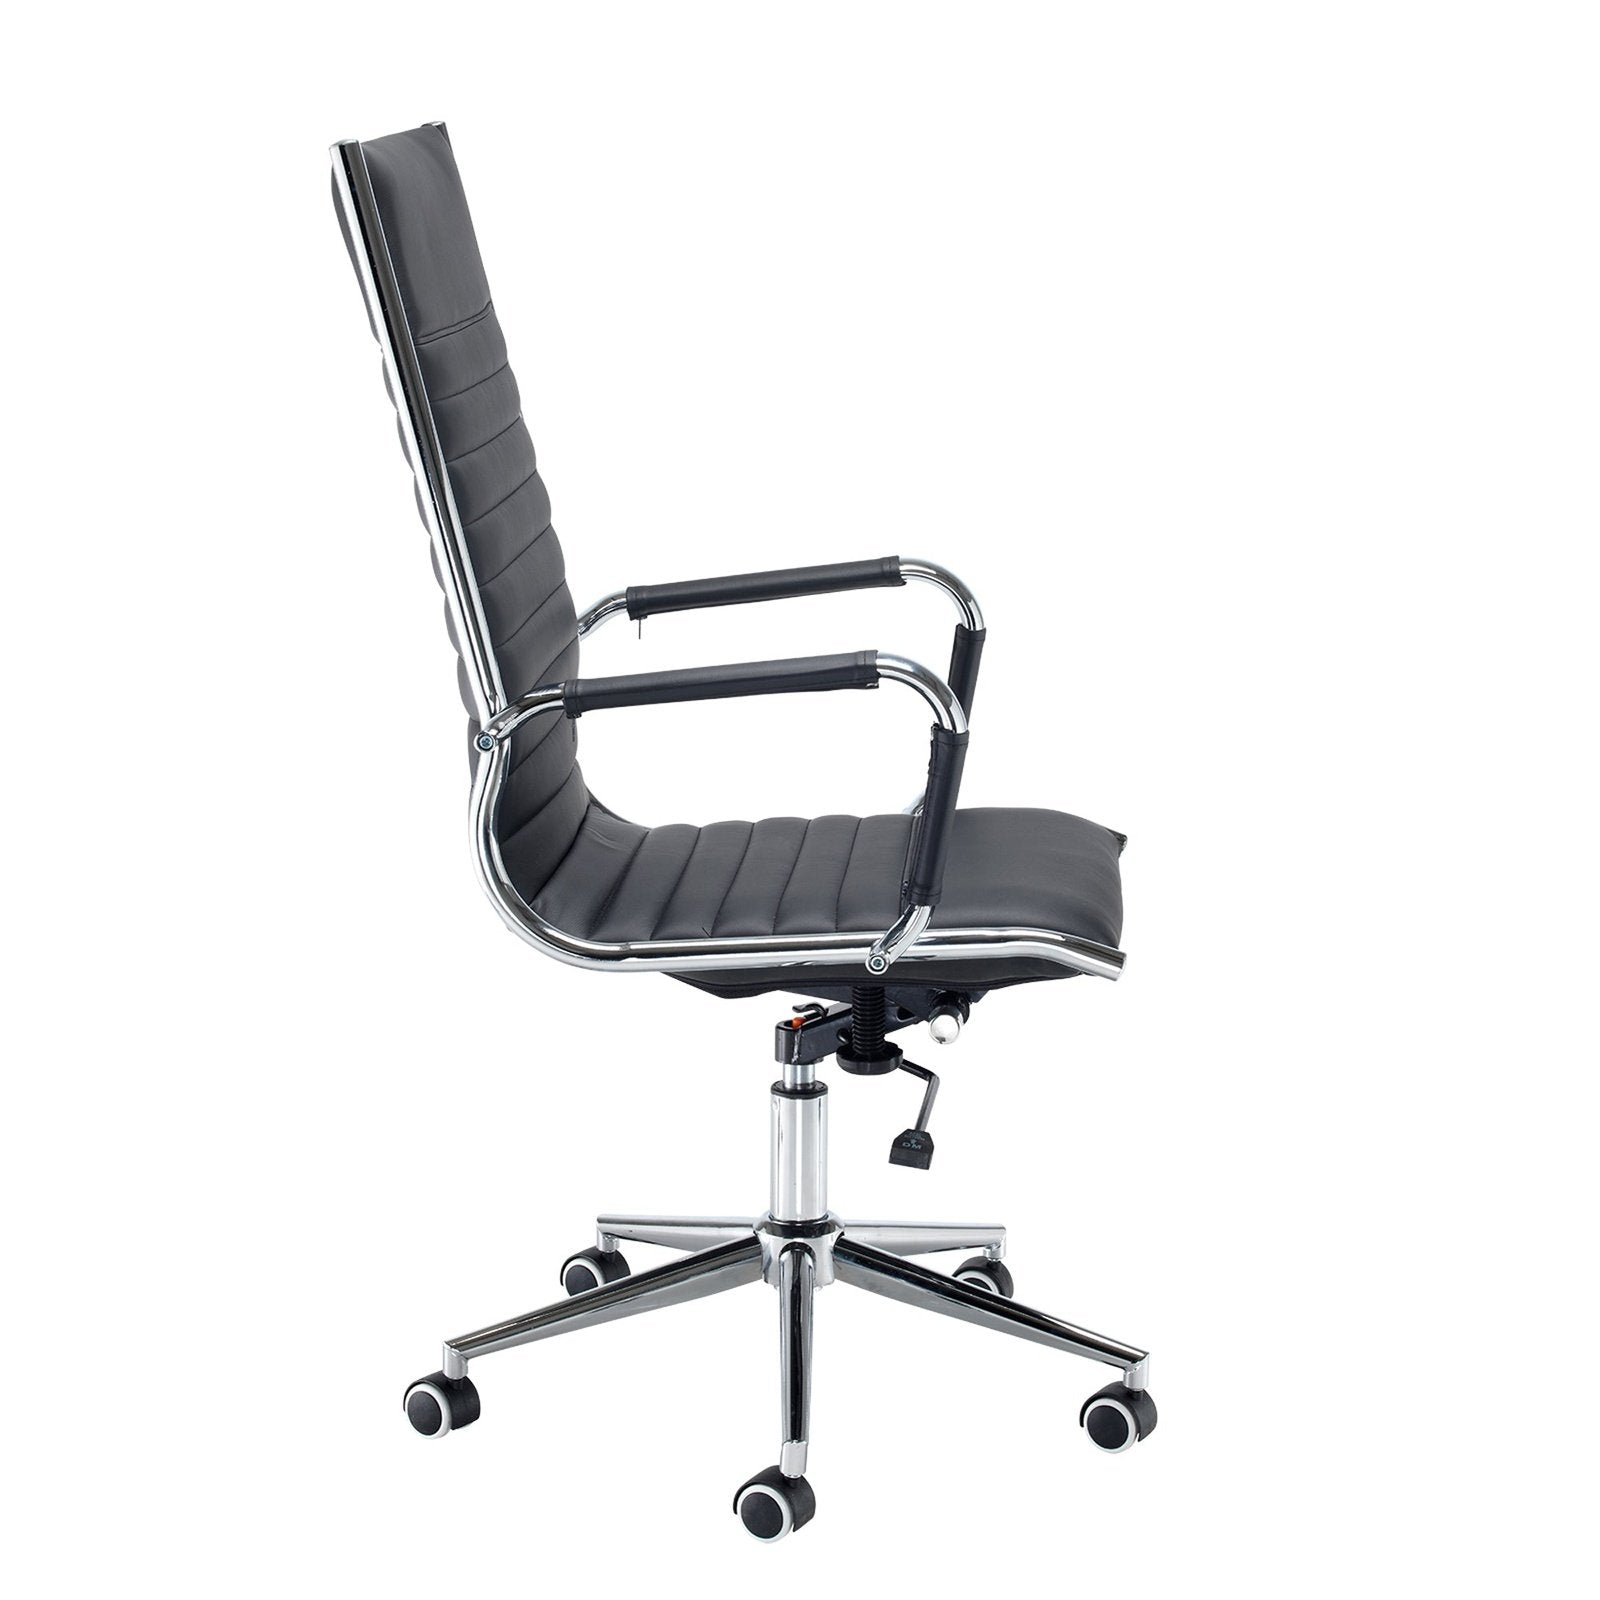 Bari executive chair - black faux leather - Office Products Online